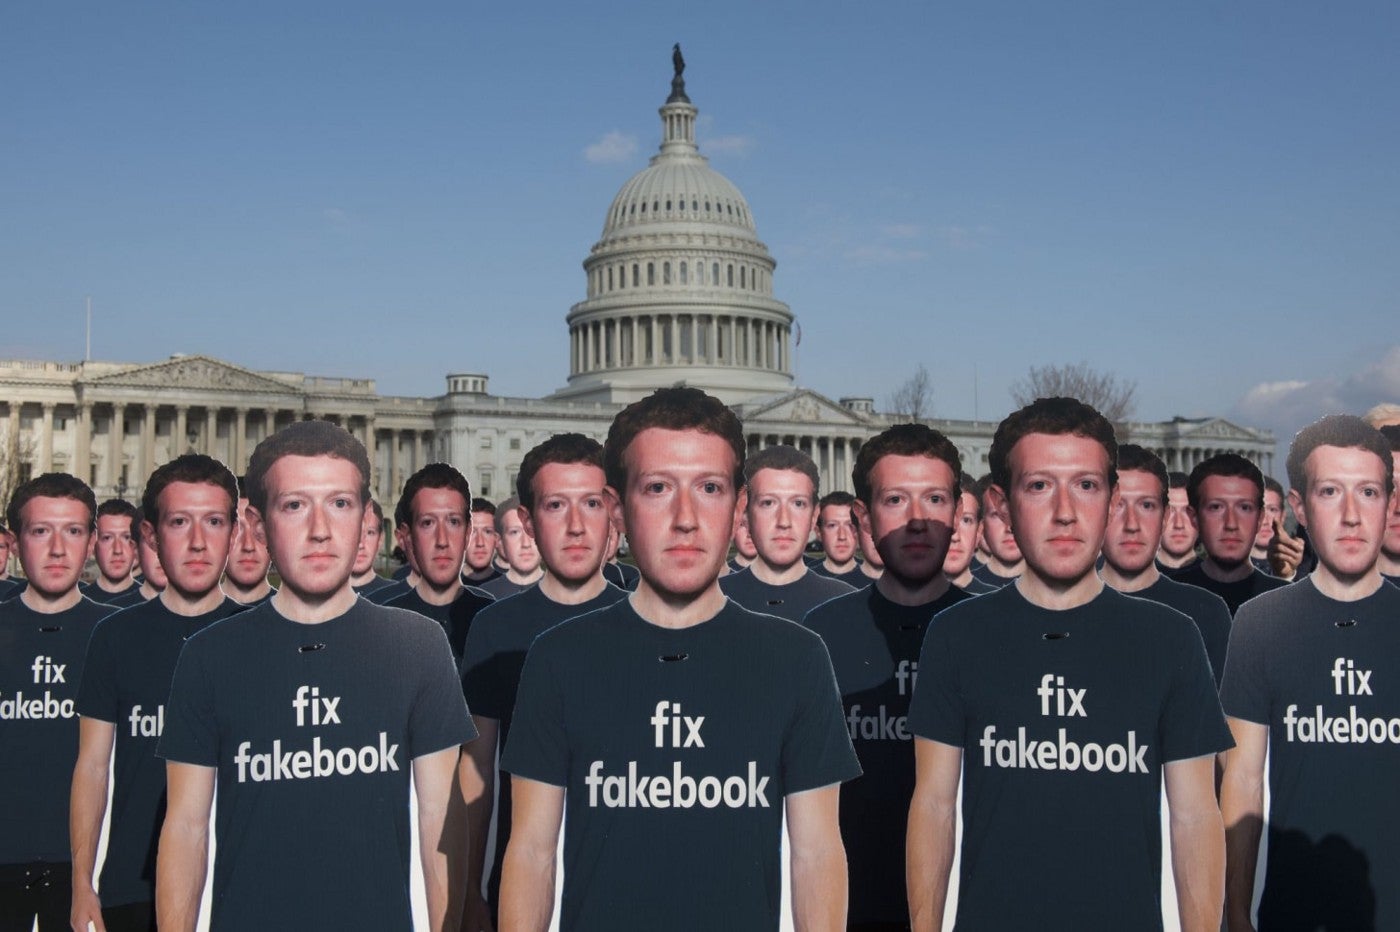 Cardboard cutouts of Facebook founder and CEO Mark Zuckerberg stood outside the U.S. Capitol on April 10, 2018, placed there by the advocacy group Avaaz to call attention to fake accounts spreading disinformation on Facebook. (Kevin Wolf/AP images for AVAAZ)